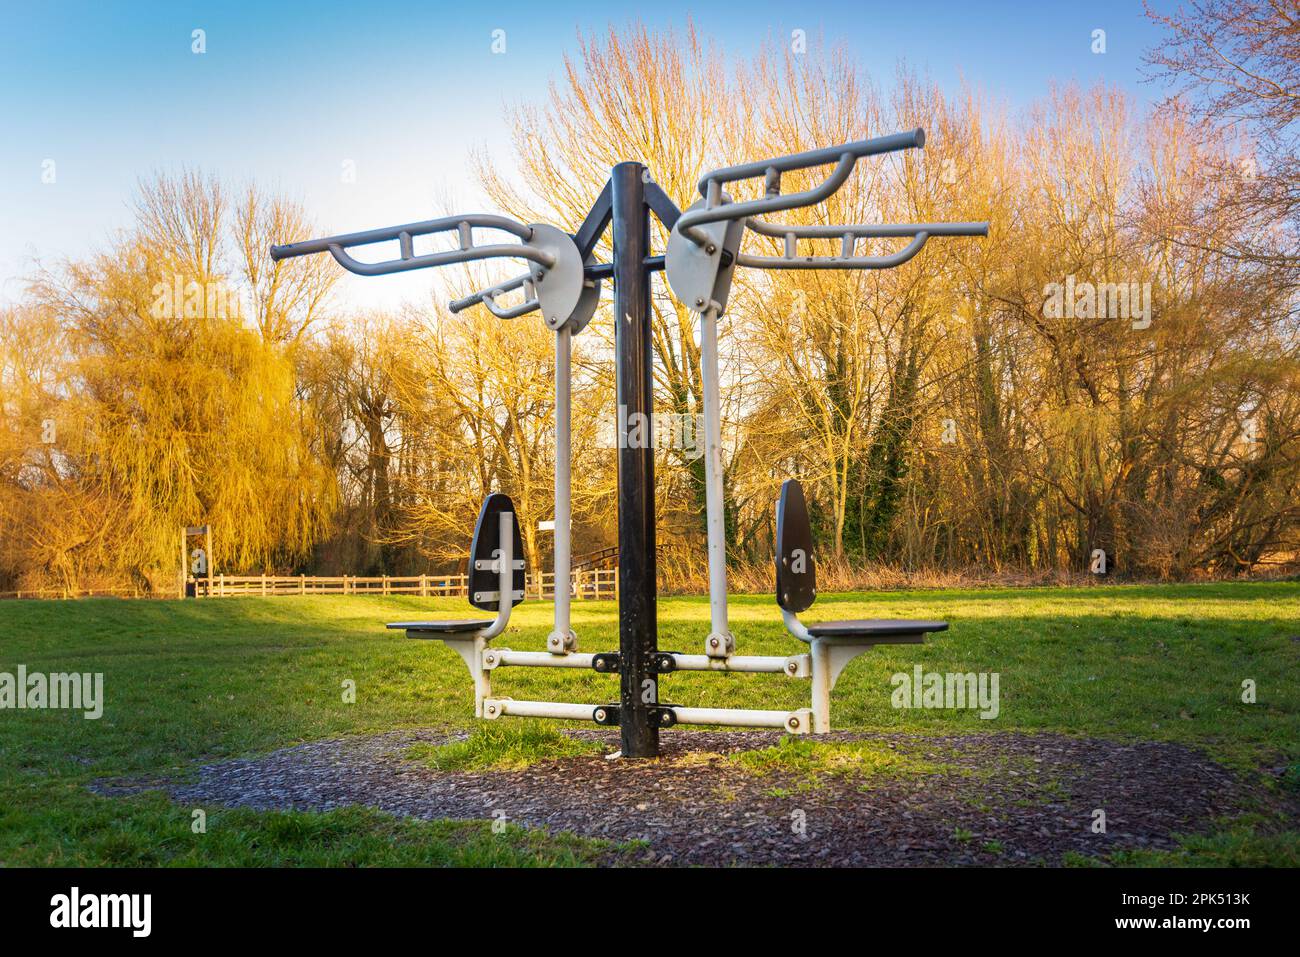 Outdoor gym exercise equipment at public park sports area. Weights ...